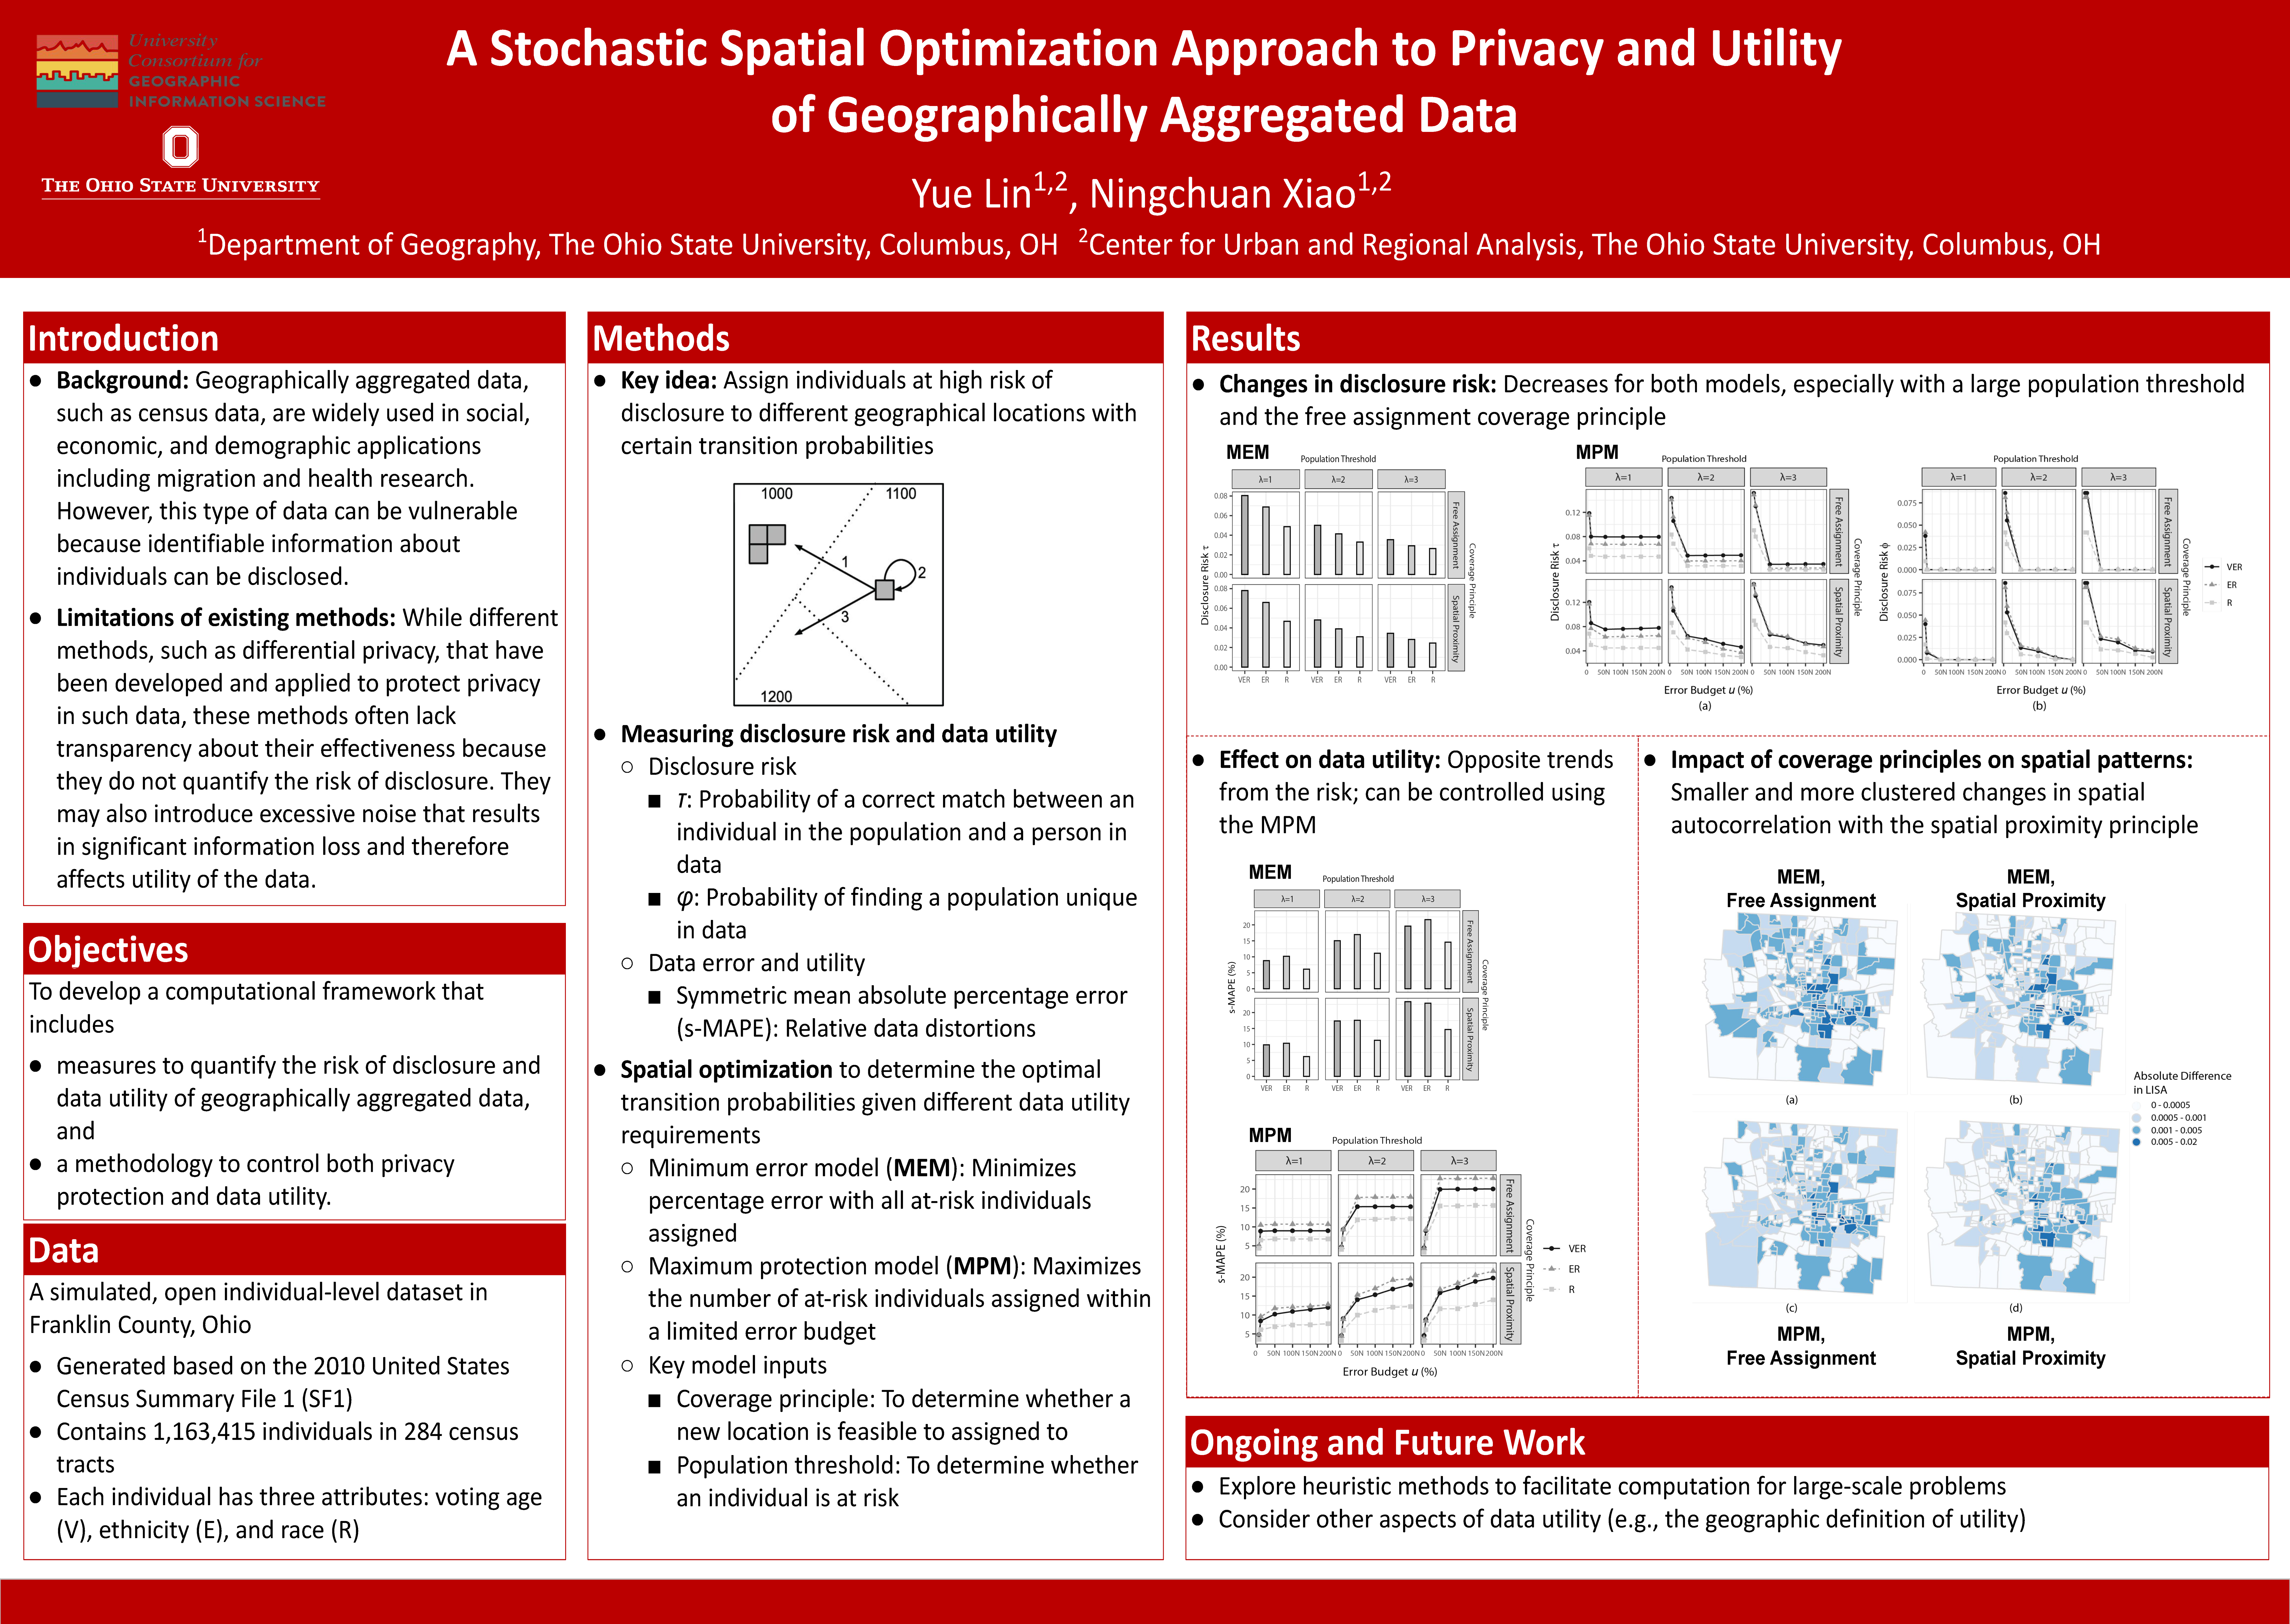 A Stochastic Spatial Optimization Approach to Privacy and Utility of Geographically Aggregated Data